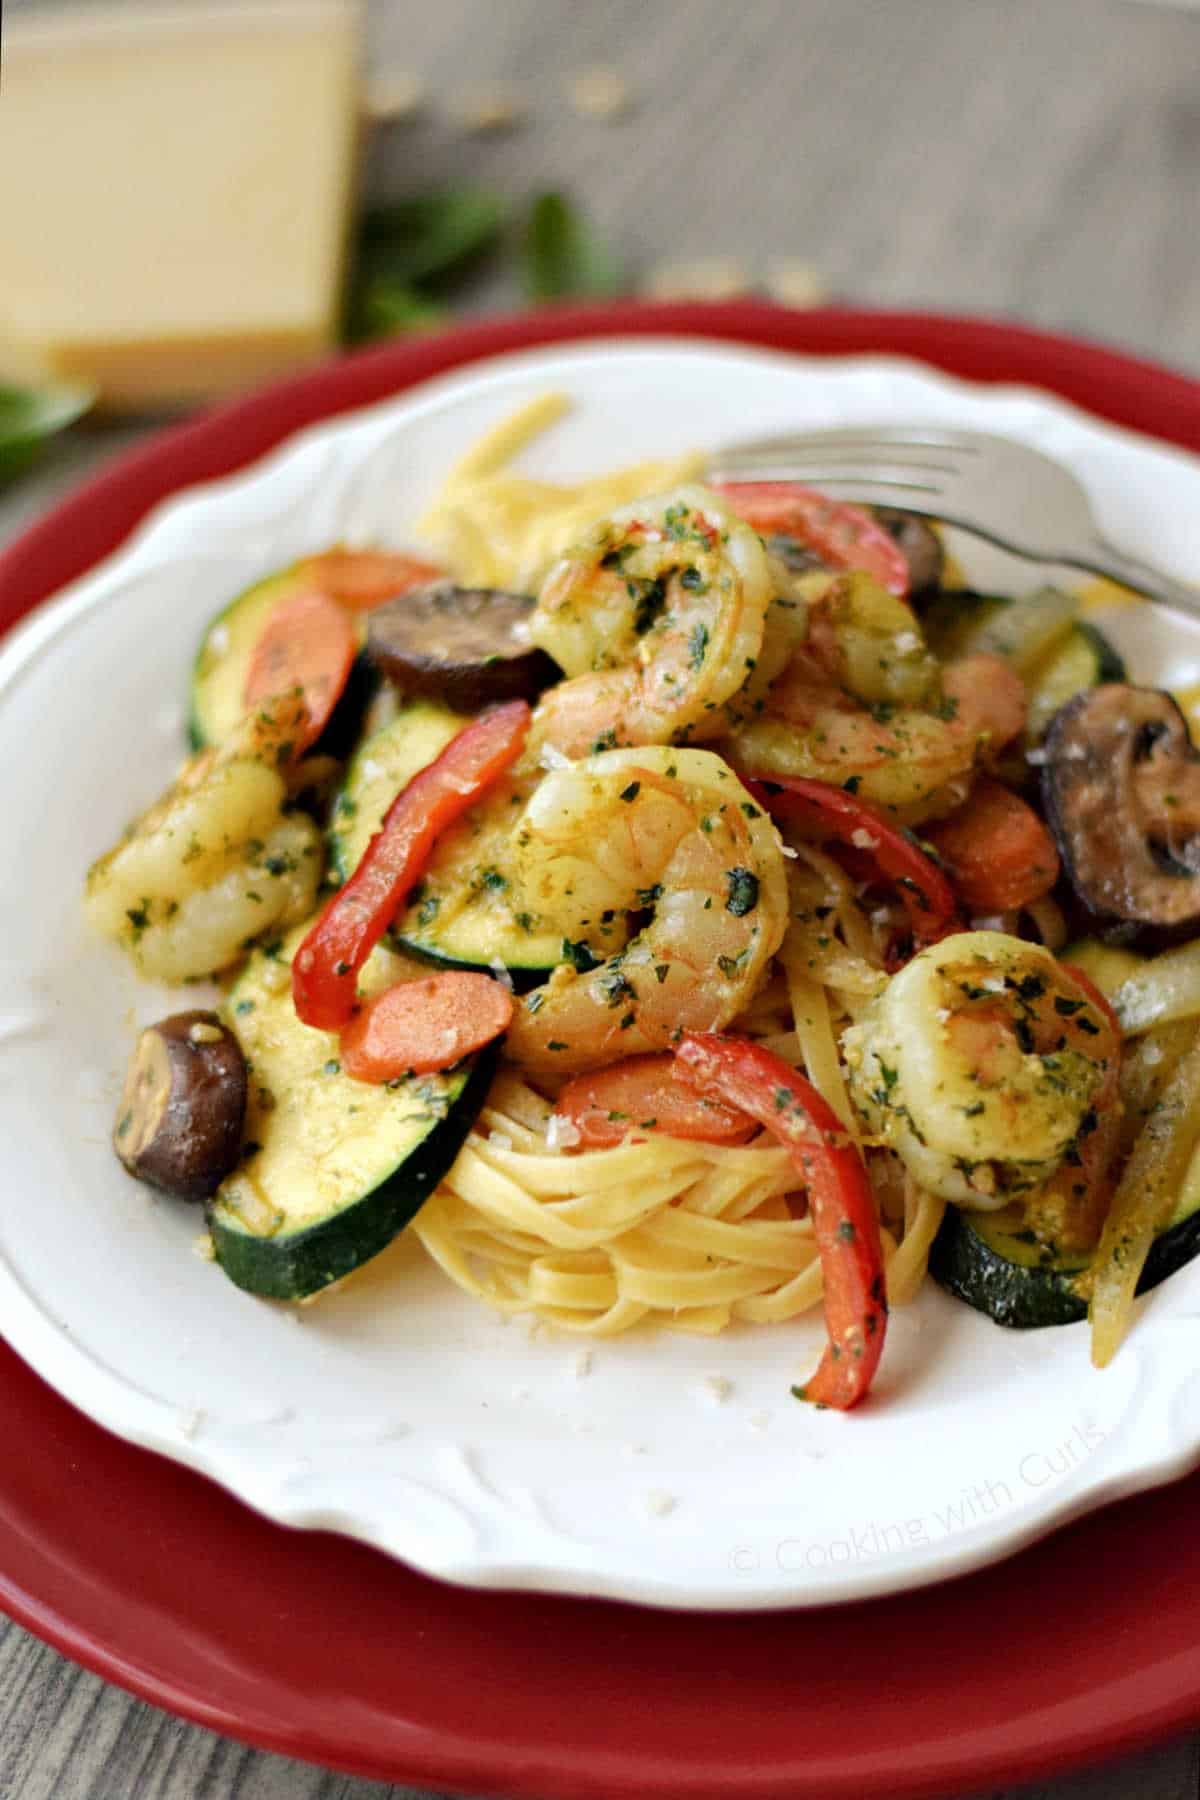 Pesto shrimp, bell pepper, zucchini, mushrooms and pasta on a plate with a wedge of parmesan in the background.